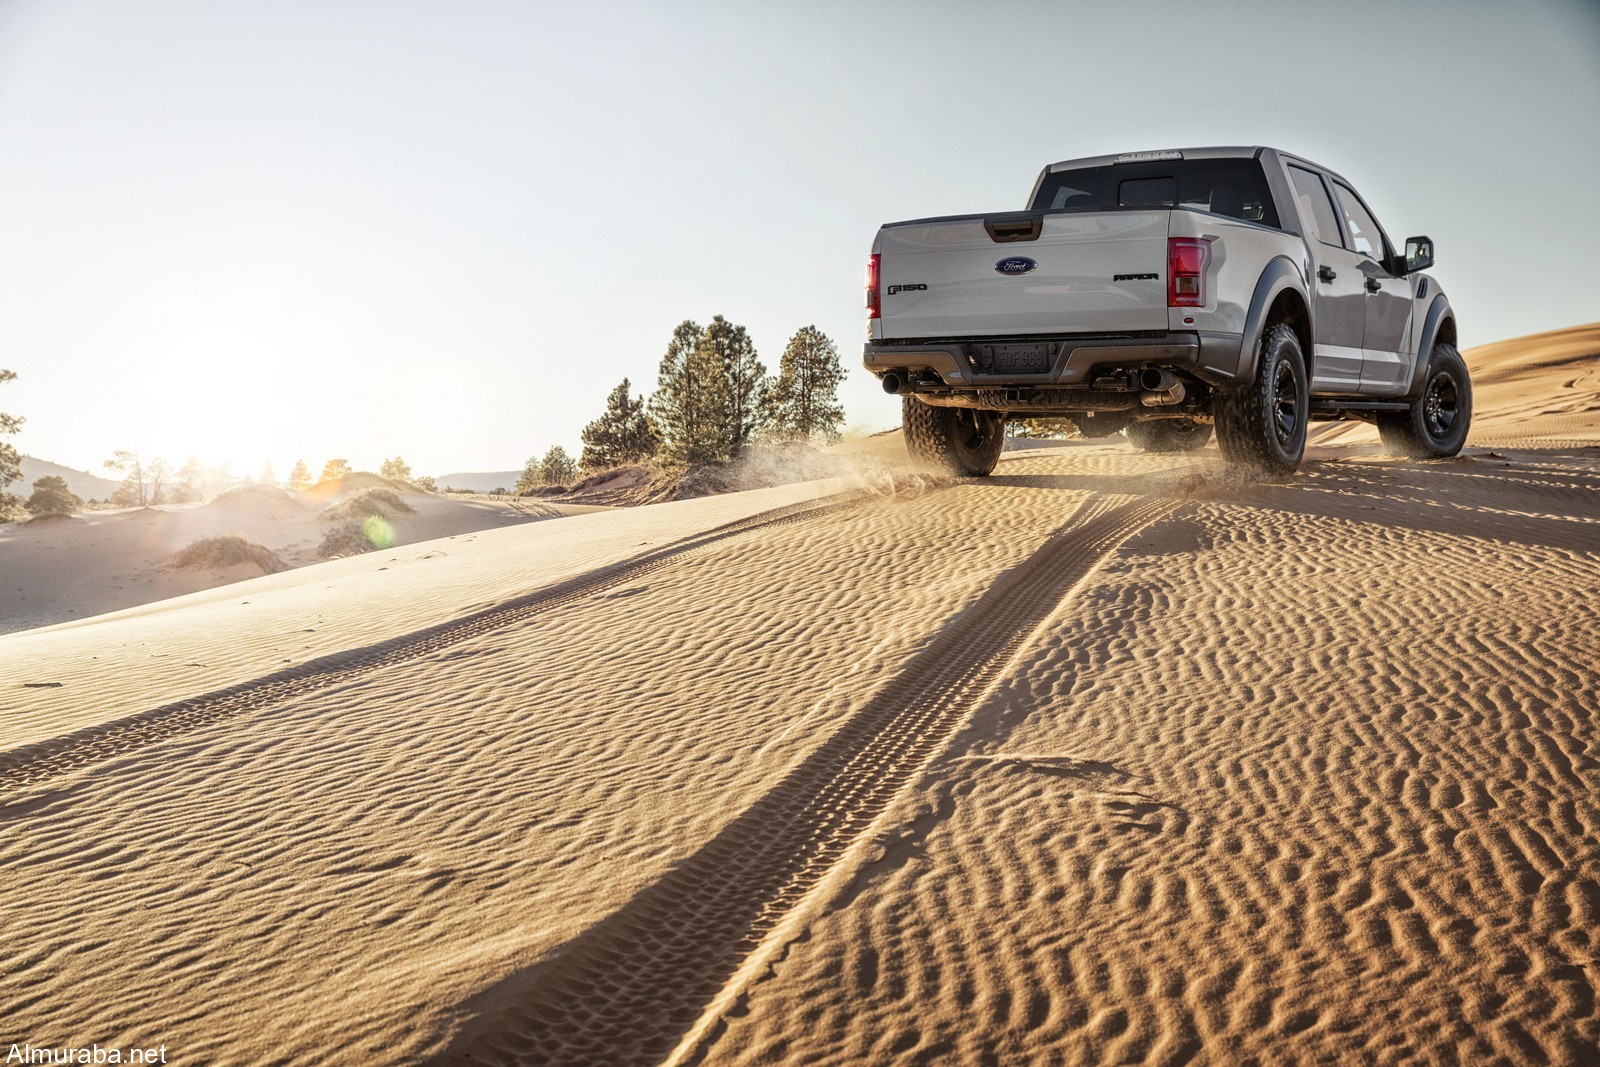 The all-new Ford F-150 Raptor (SuperCrew model pictured) boasts its first-ever true dual exhaust and new 17-inch wheels with next-generation BFGoodrich All-Terrain KO2 tires designed for off-road performance.